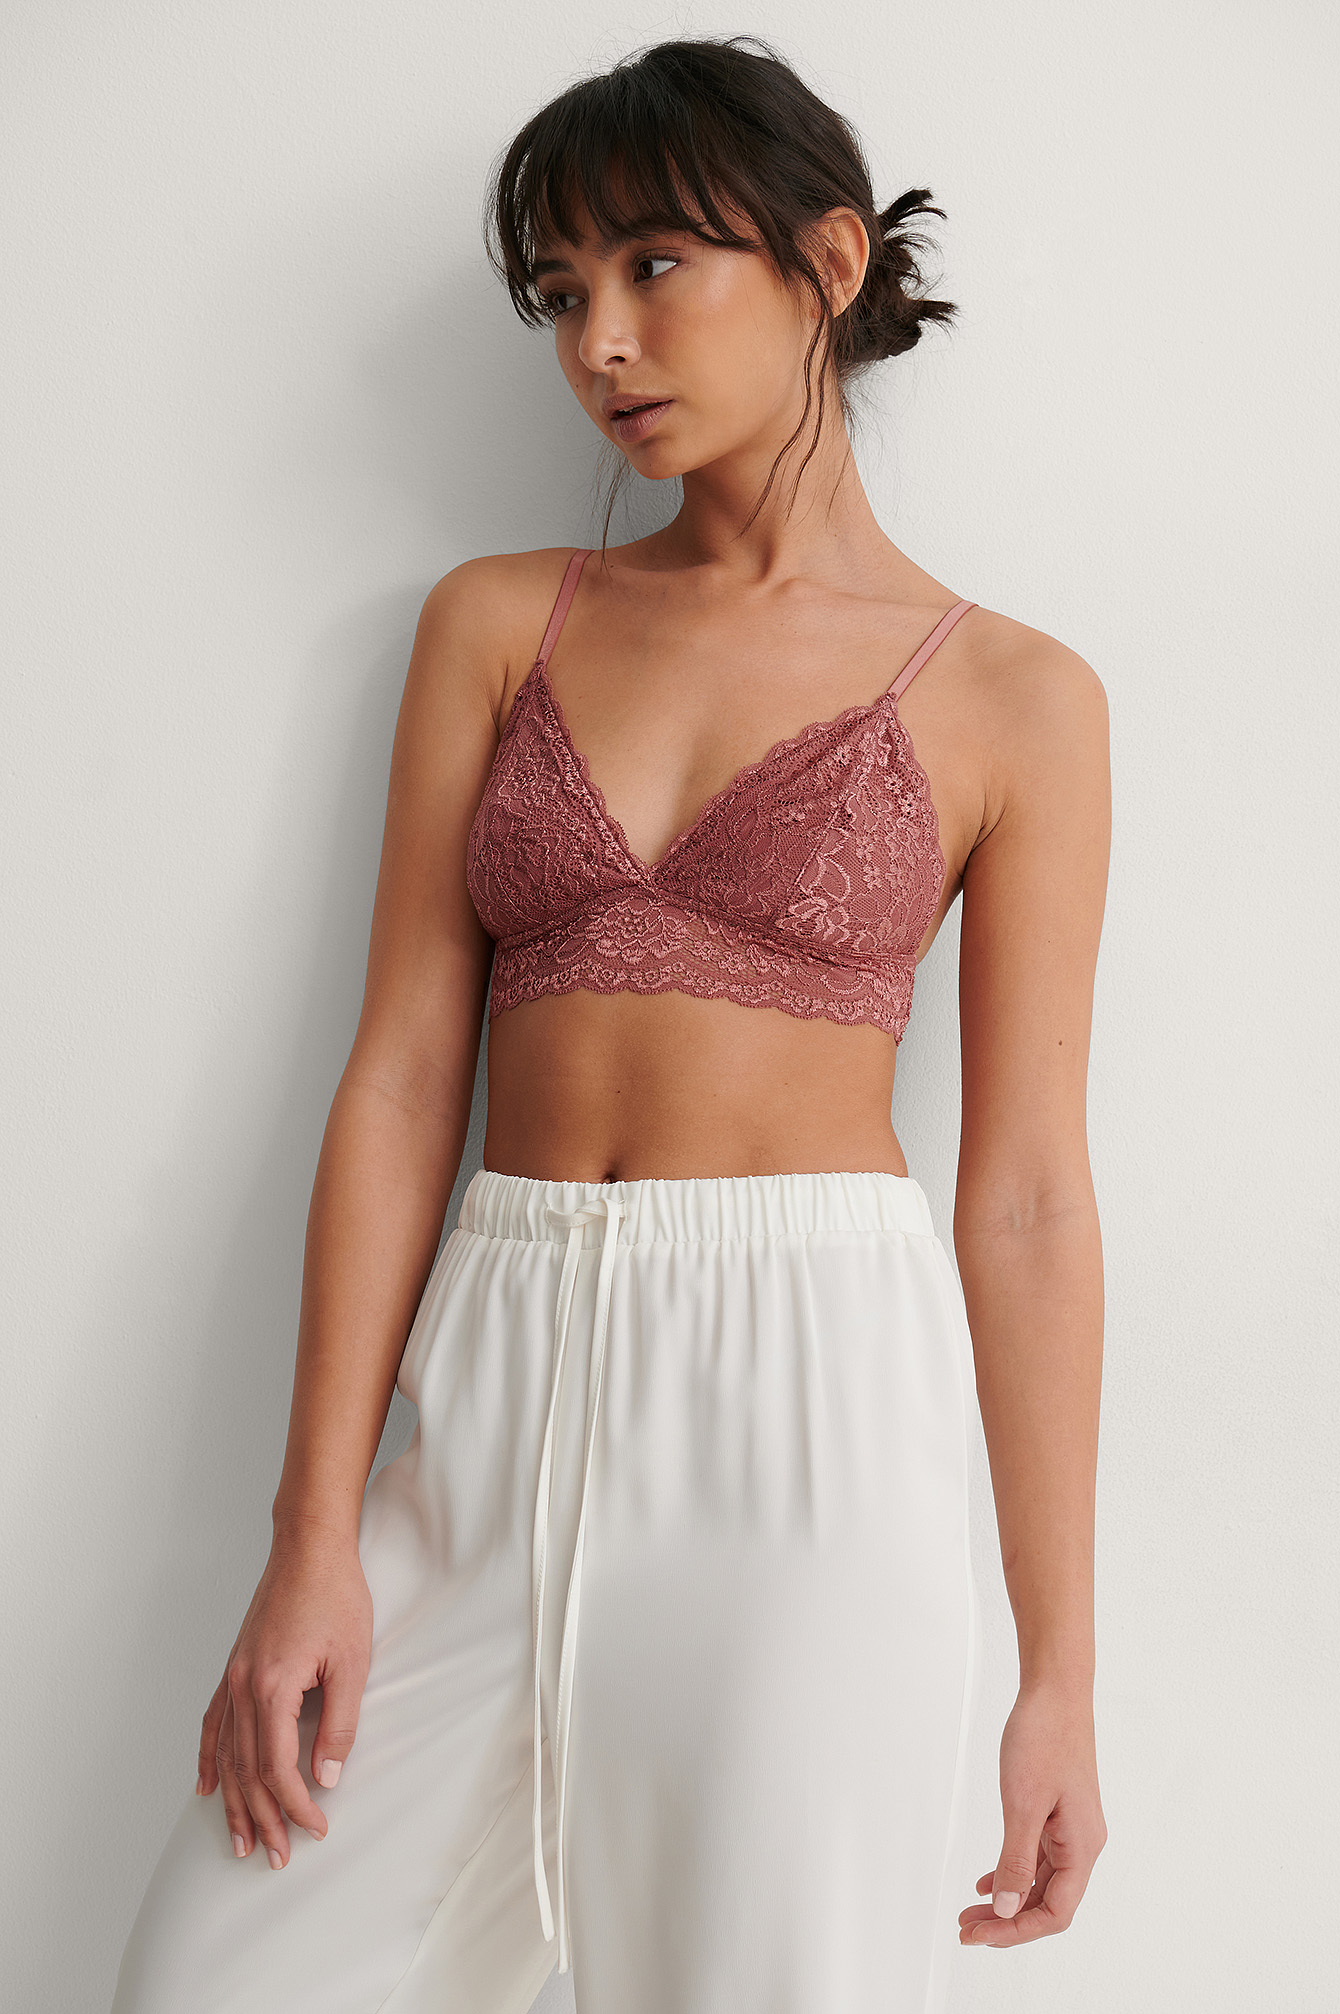 Basic Floral Lace Bra Outfit